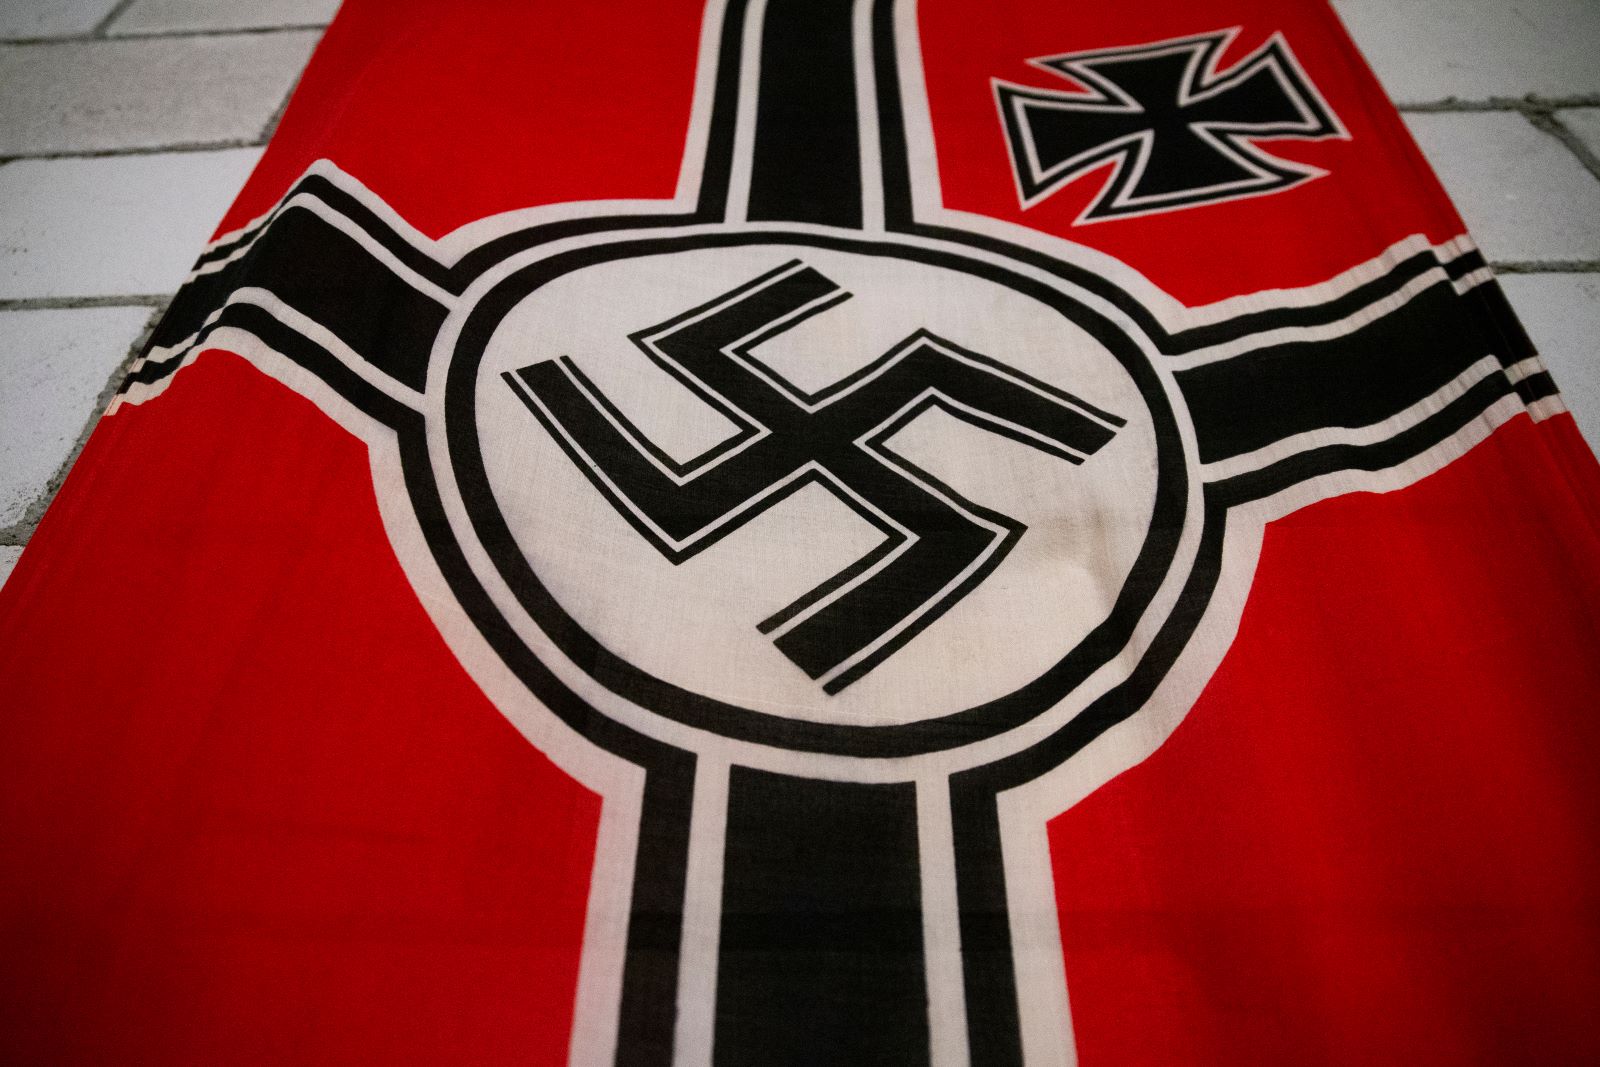 Image Credit: Shutterstock / Karolis Kavolelis <p>Allegedly associated with Nazi Germany, the Vril Society was said to have sought to harness an all-powerful, occult energy source called “Vril.” Their existence and influence, however, remain subjects of debate.</p>